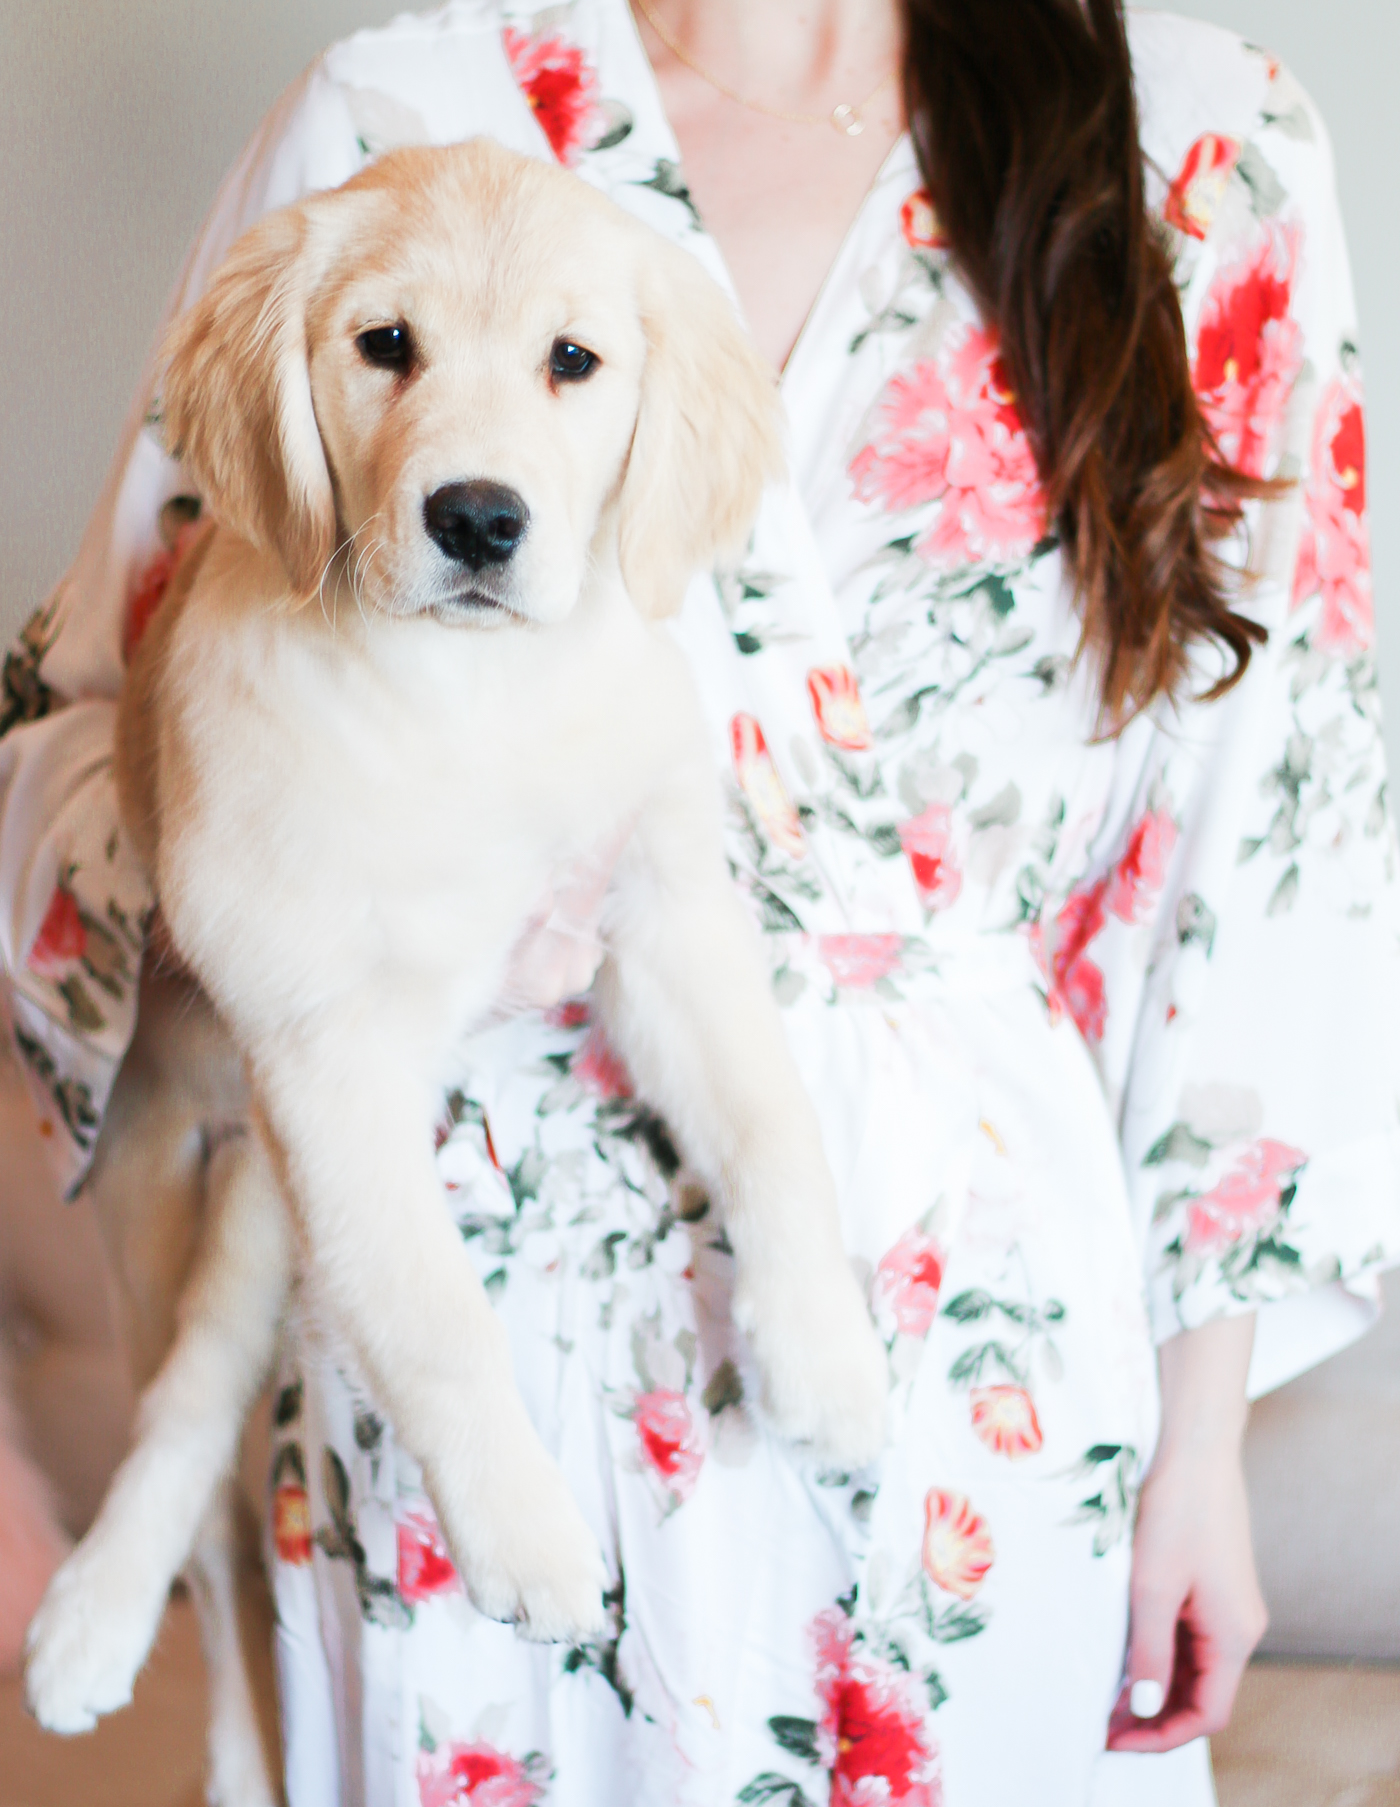 Cute golden retriever puppy, Yumi Kim floral robe, Truffoire skin care review, black truffle skincare, truffle skincare, Truffoire Review: The Benefits of Black Truffle Skincare by beauty blogger Stephanie Ziajka from Diary of a Debutante, Truffoire Black Collection review, Truffoire review